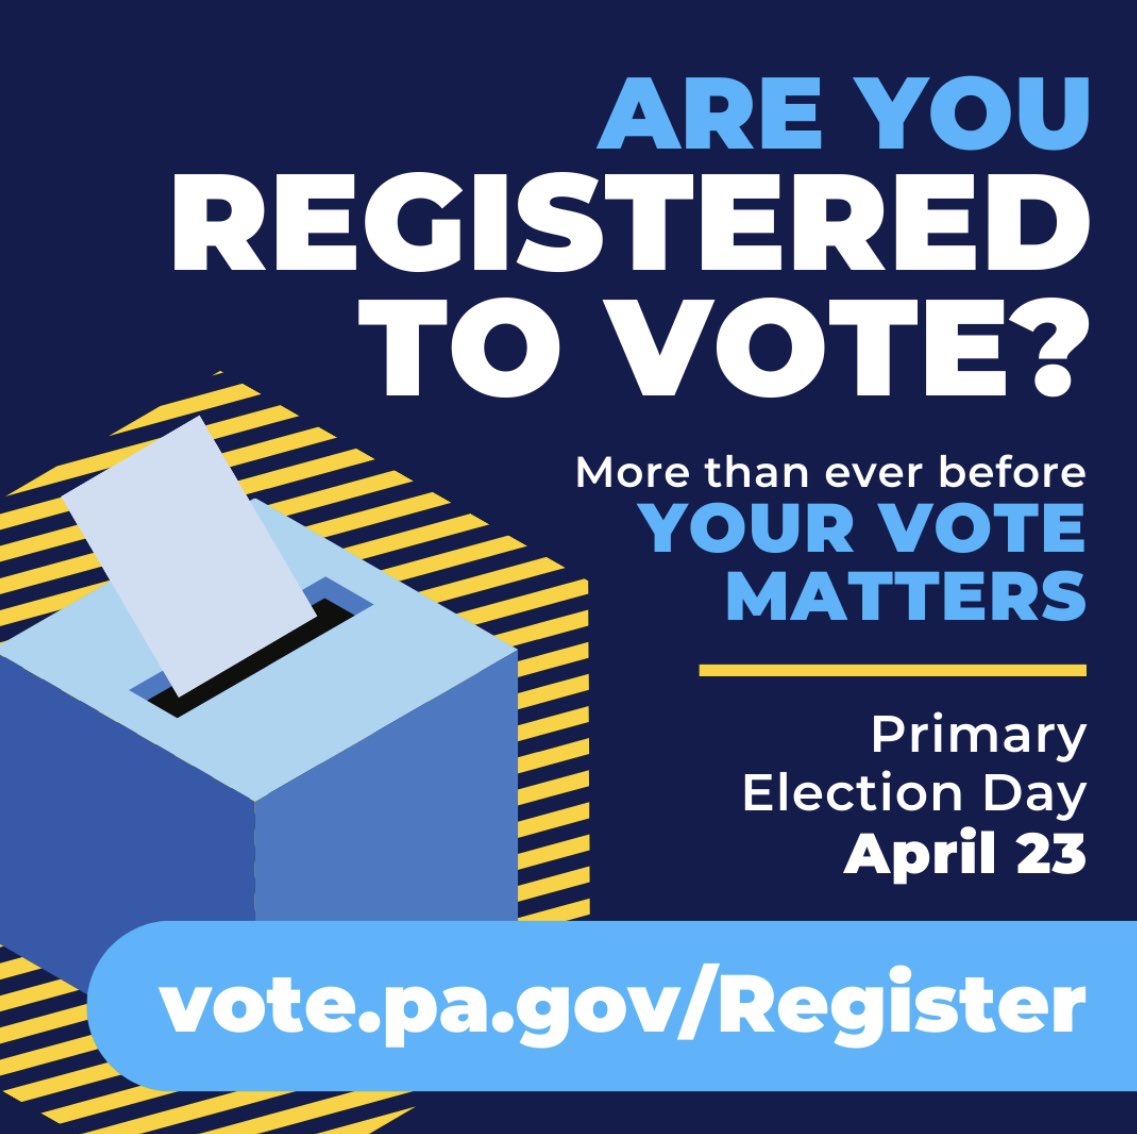 Are you registered to vote? 🗳️ Today is the last day to register if you want to cast a ballot in the April 23 primary election! Visit vote.pa.gov/Register for more details.